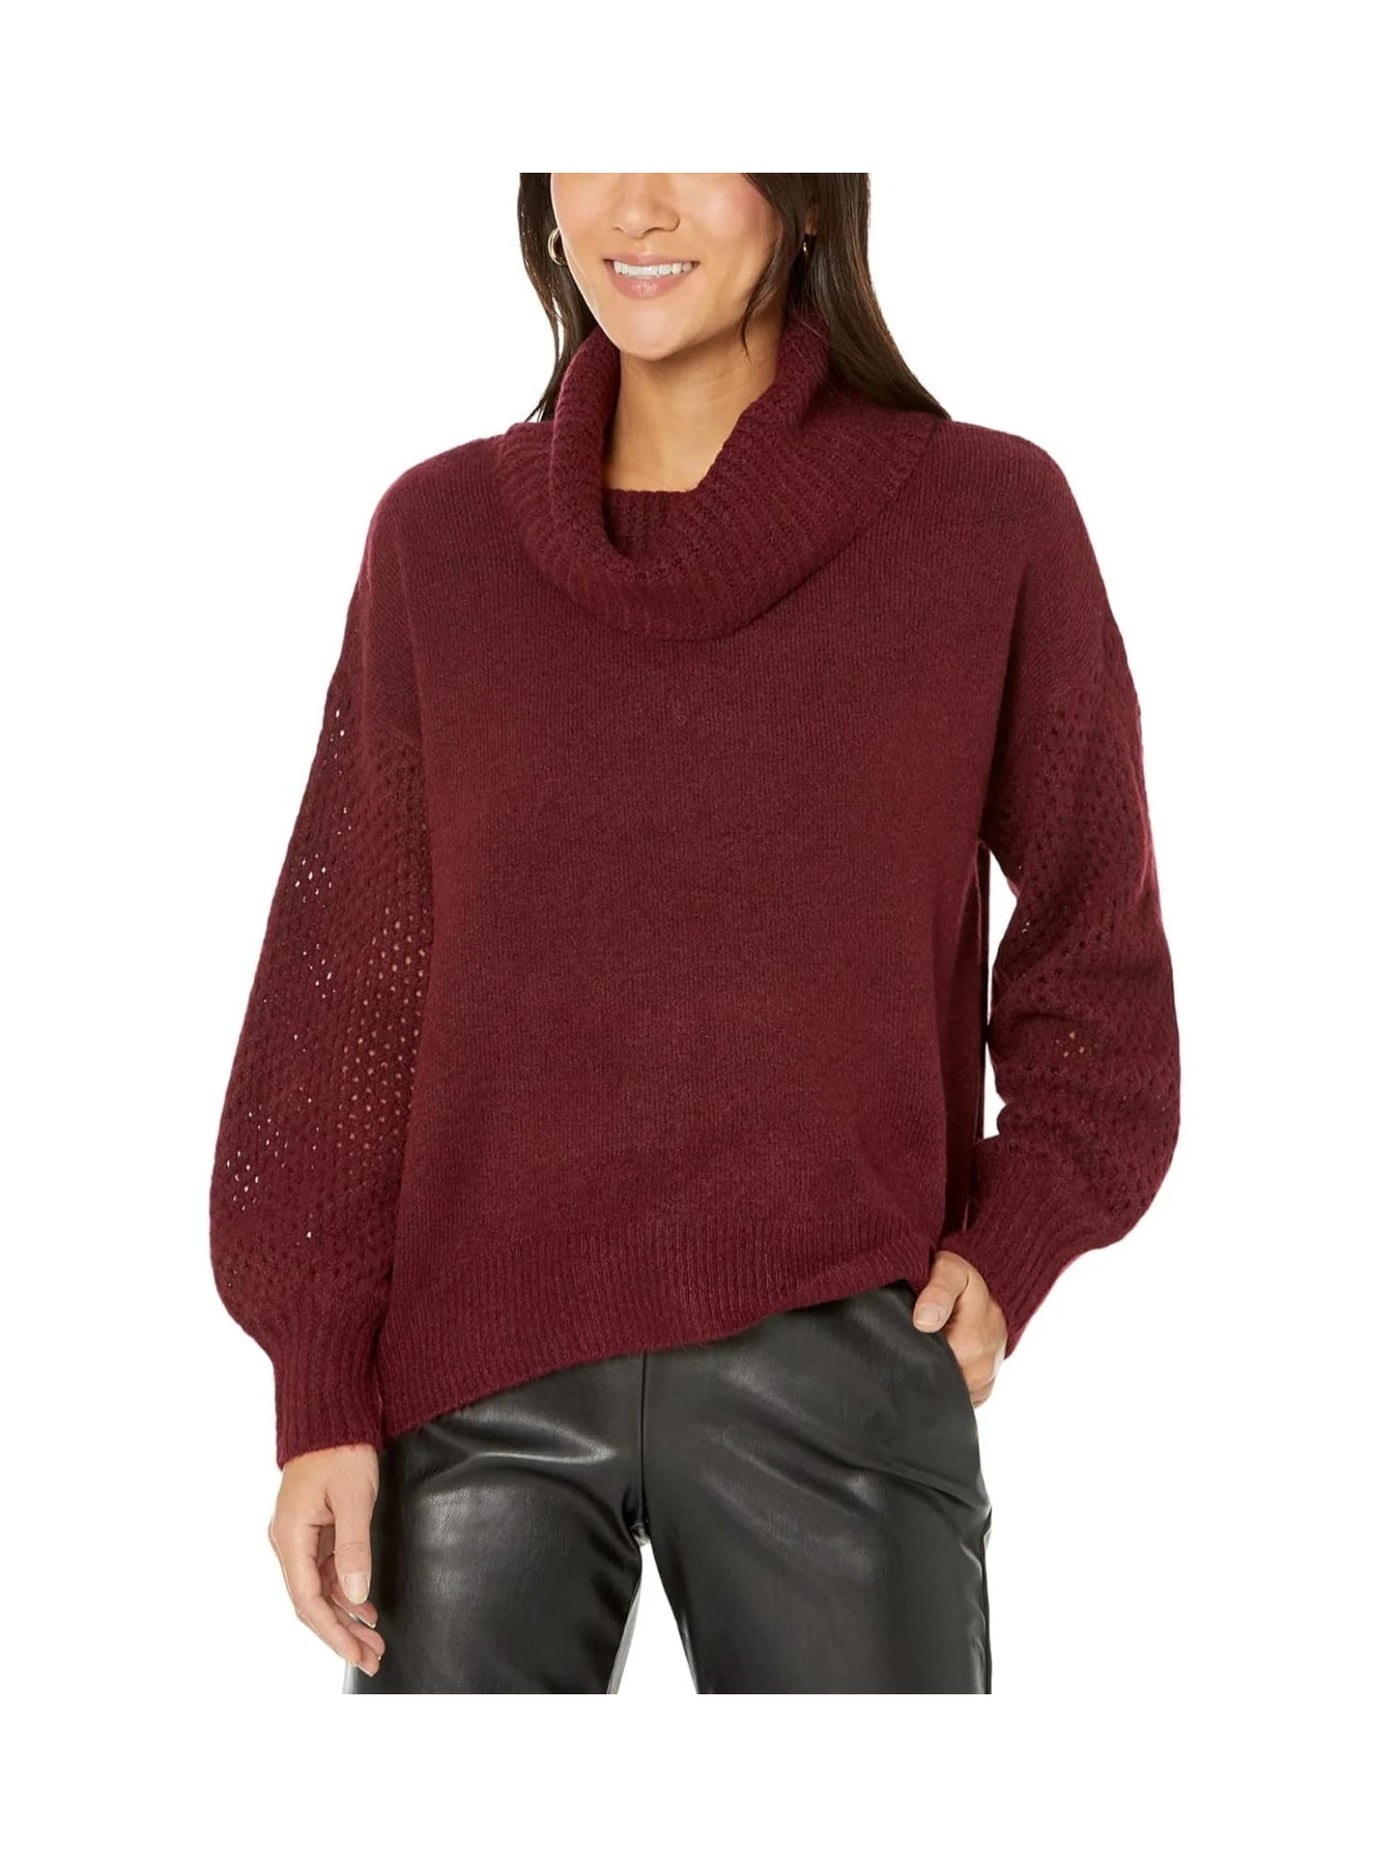 VINCE CAMUTO Womens Maroon Heather Long Sleeve Cowl Neck Wear To Work Sweater XS